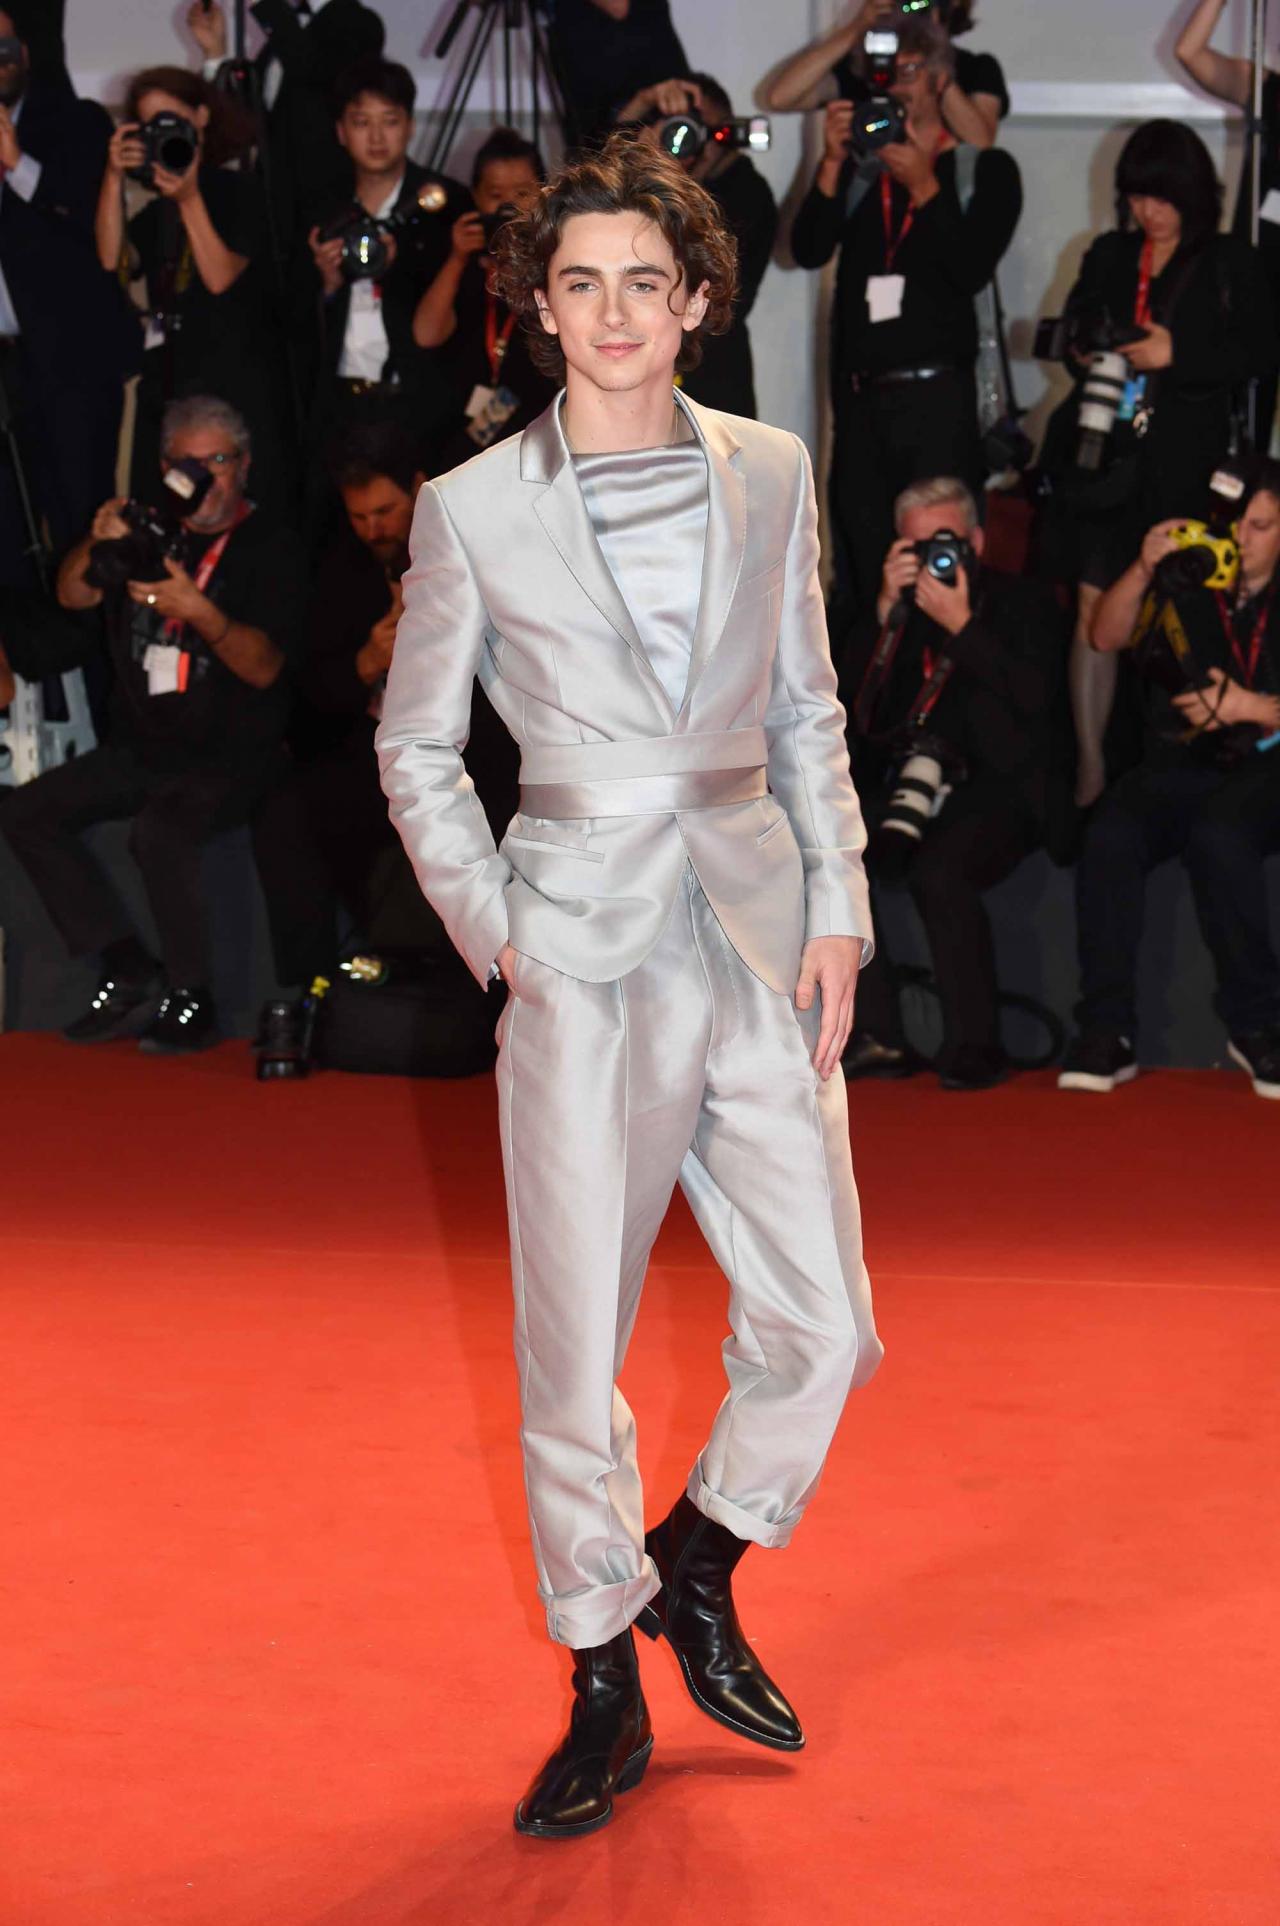 VENICE, ITALY - SEPTEMBER 02:  Timothee Chalamet attends "The King" red carpet during the 76th Venice Film Festival at Sala Grande on September 02, 2019 in Venice, Italy. (Photo by Stephane Cardinale - Corbis/Corbis via Getty Images)